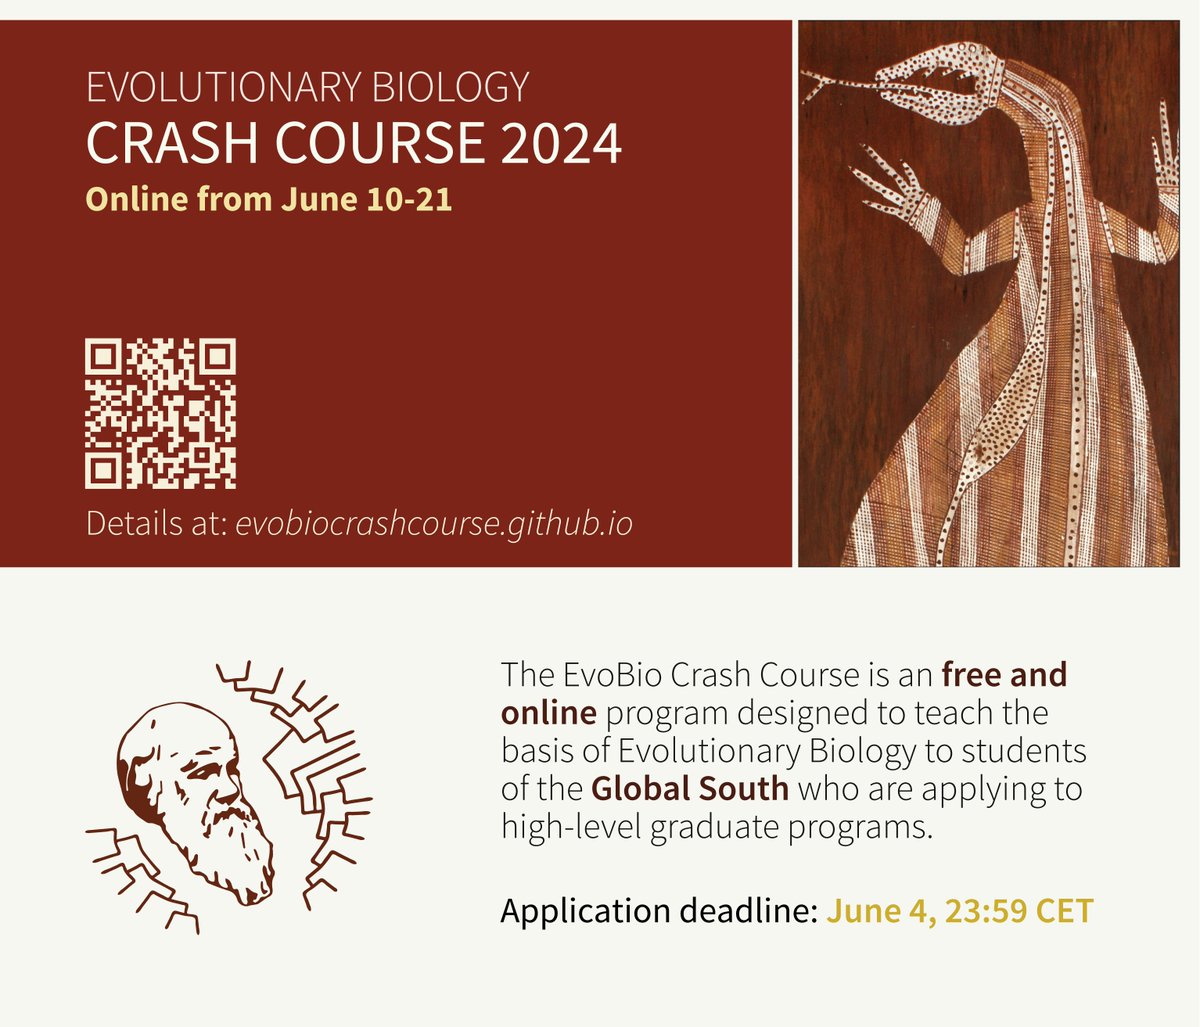 We are extremely excited to announce the 3rd edition of the EvoBio Crash Course! 🥳 We focus on providing a thorough course on the basics of #EvoBio and tips to build a career in the field directed to students from the Global South 💚 Register here: forms.gle/tJ9kaM9GsM86mx…